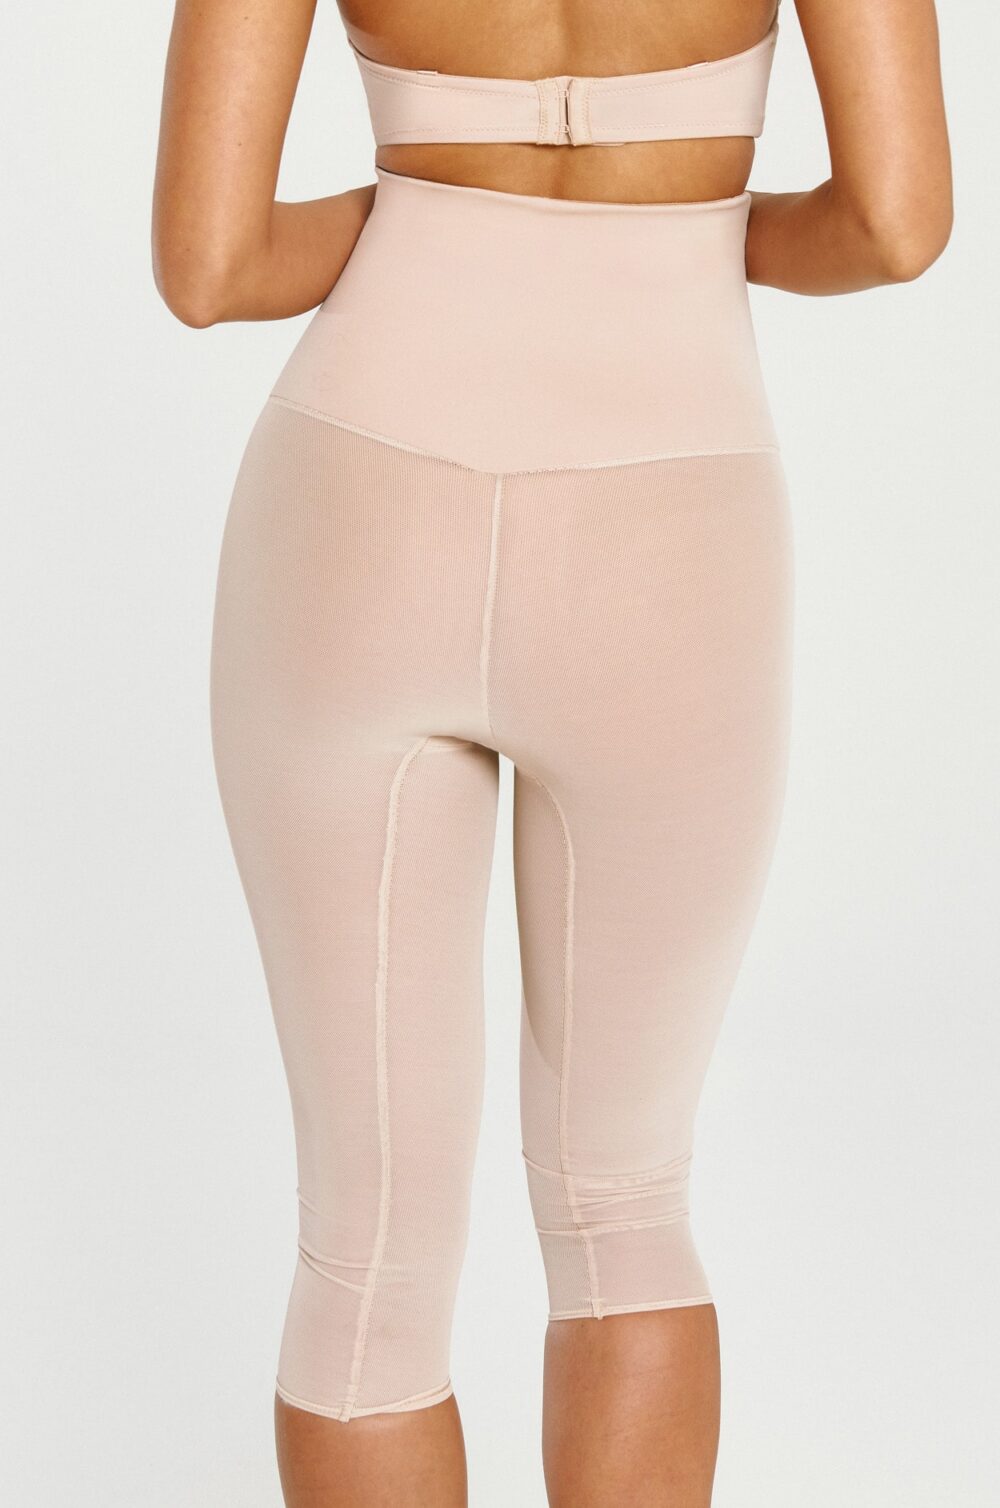 Smooth Couture Tights - Back